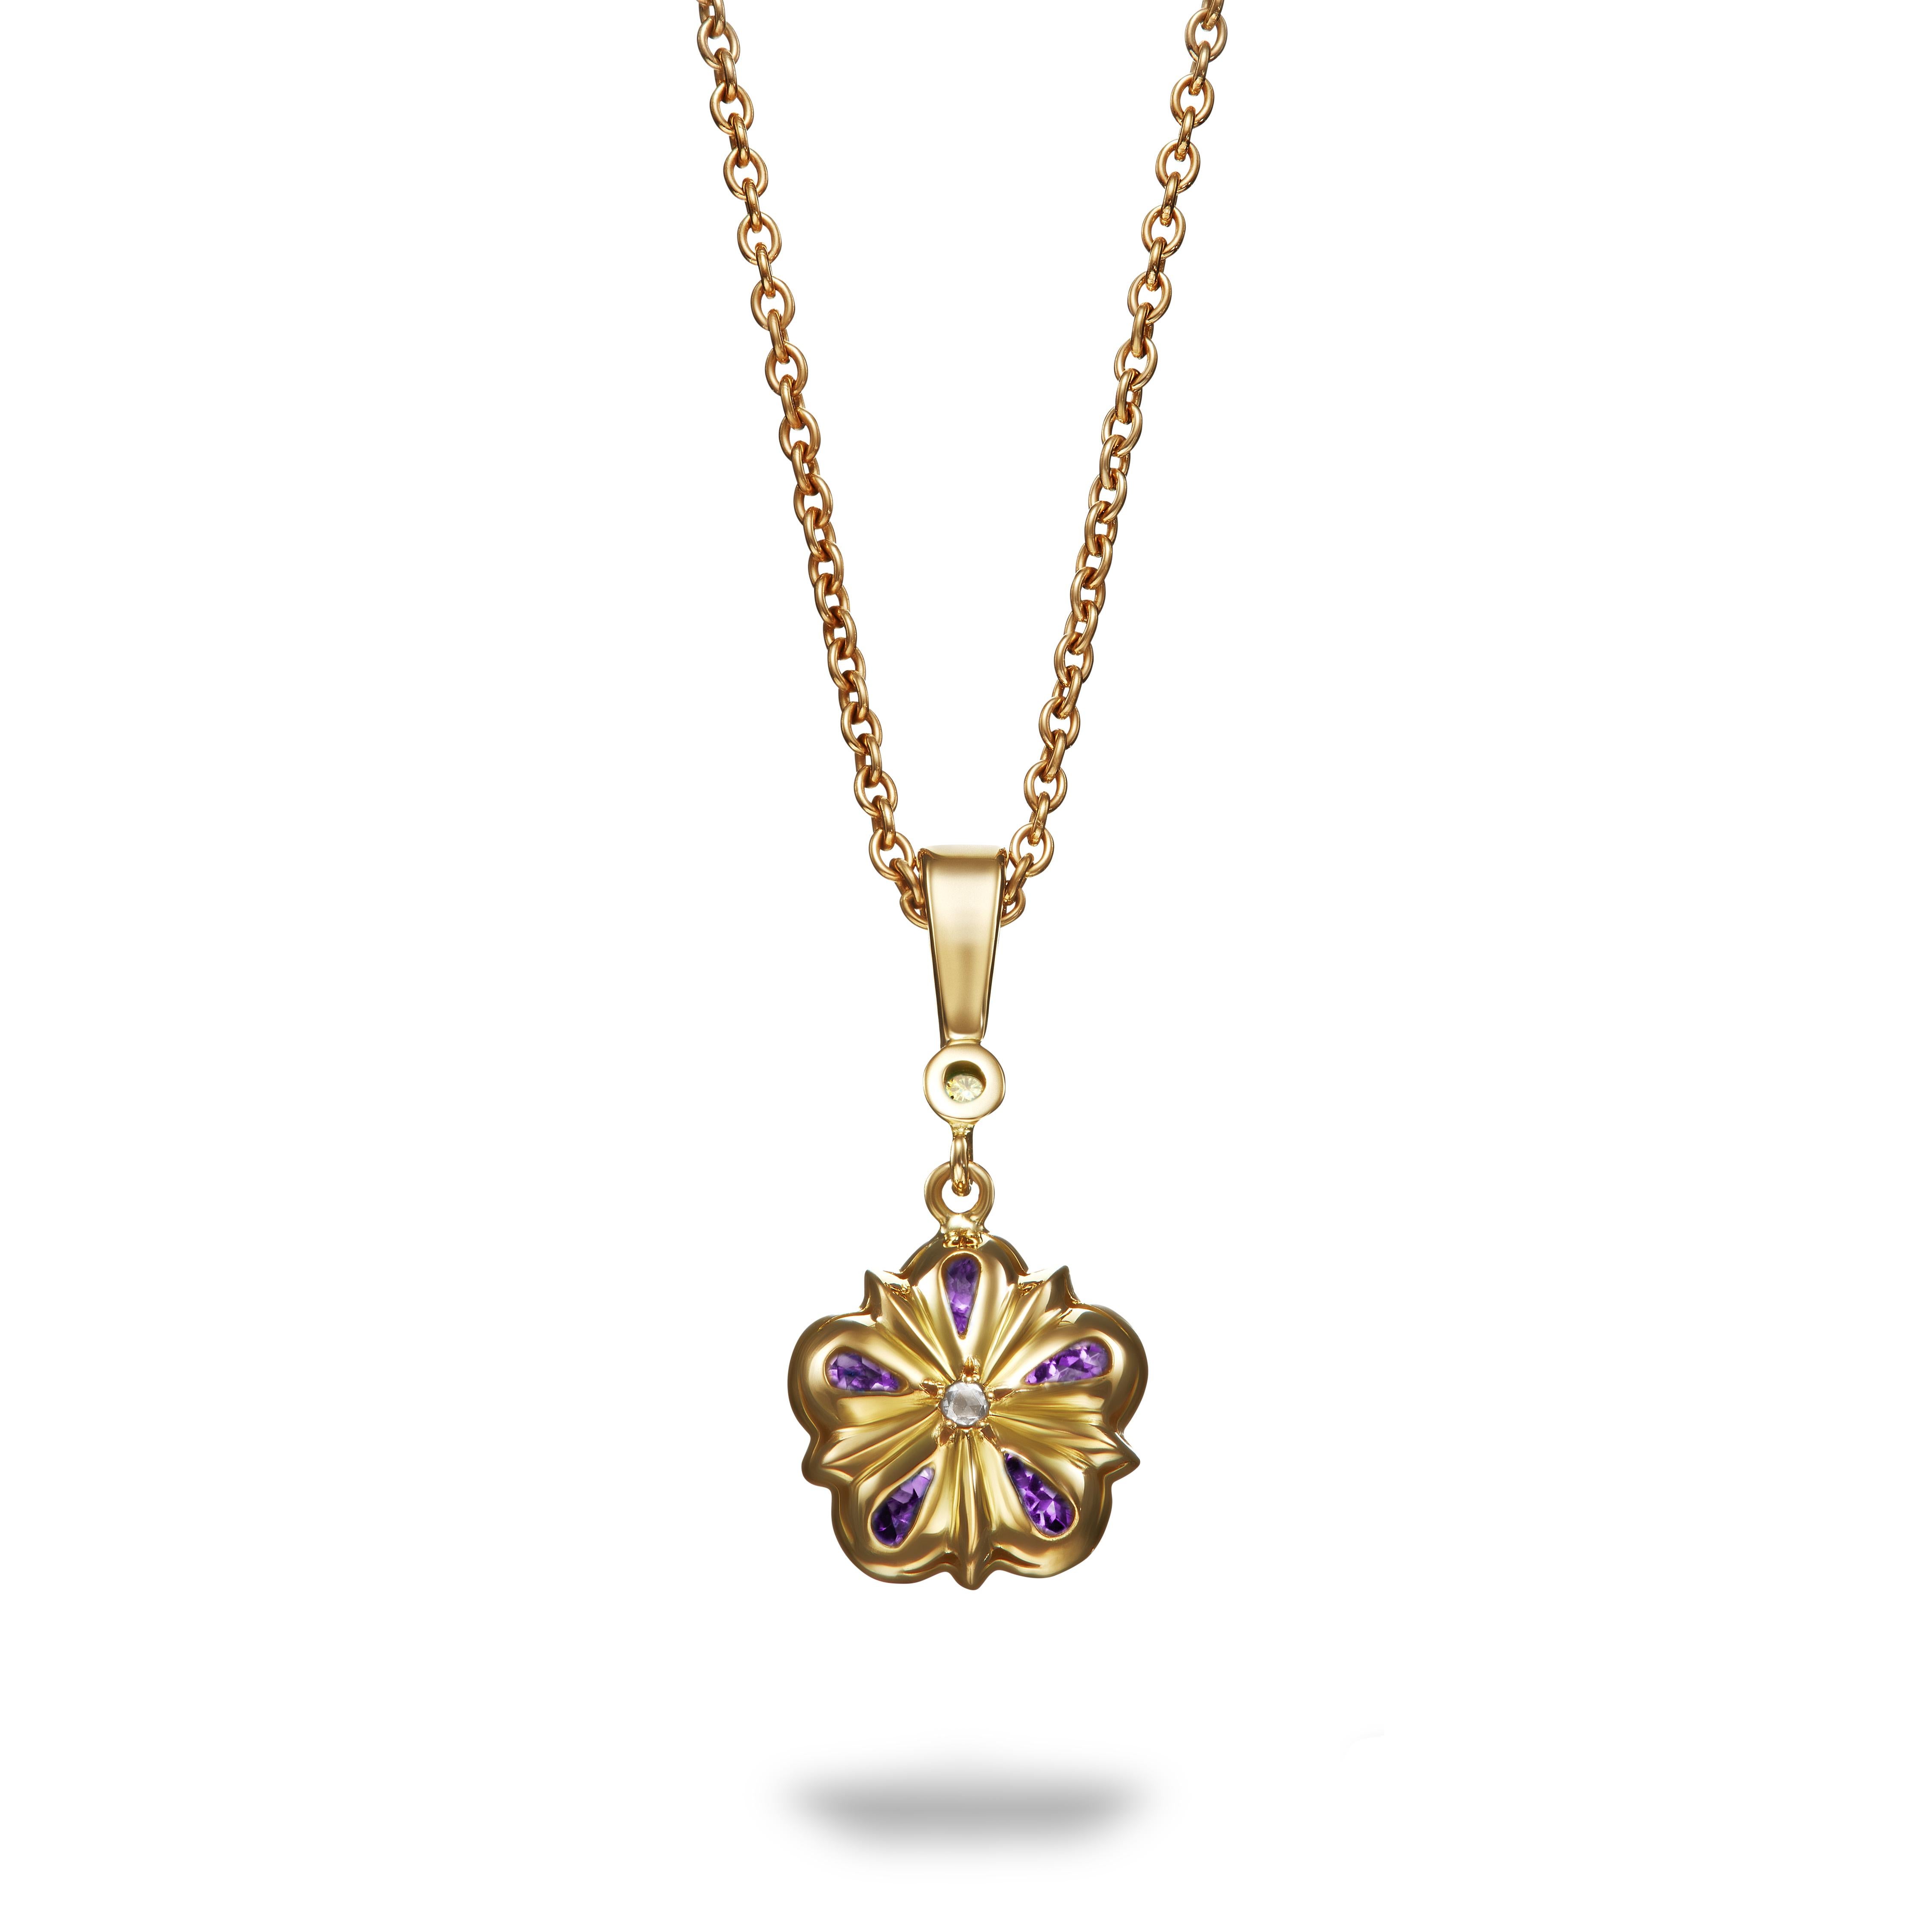 This unique amethyst and natural yellow diamond Rose pendant features colourful amethysts surrounding a vibrant natural yellow round brilliant cut diamond. The pendant is suspended from an 18k yellow gold bail with another lovely matching yellow